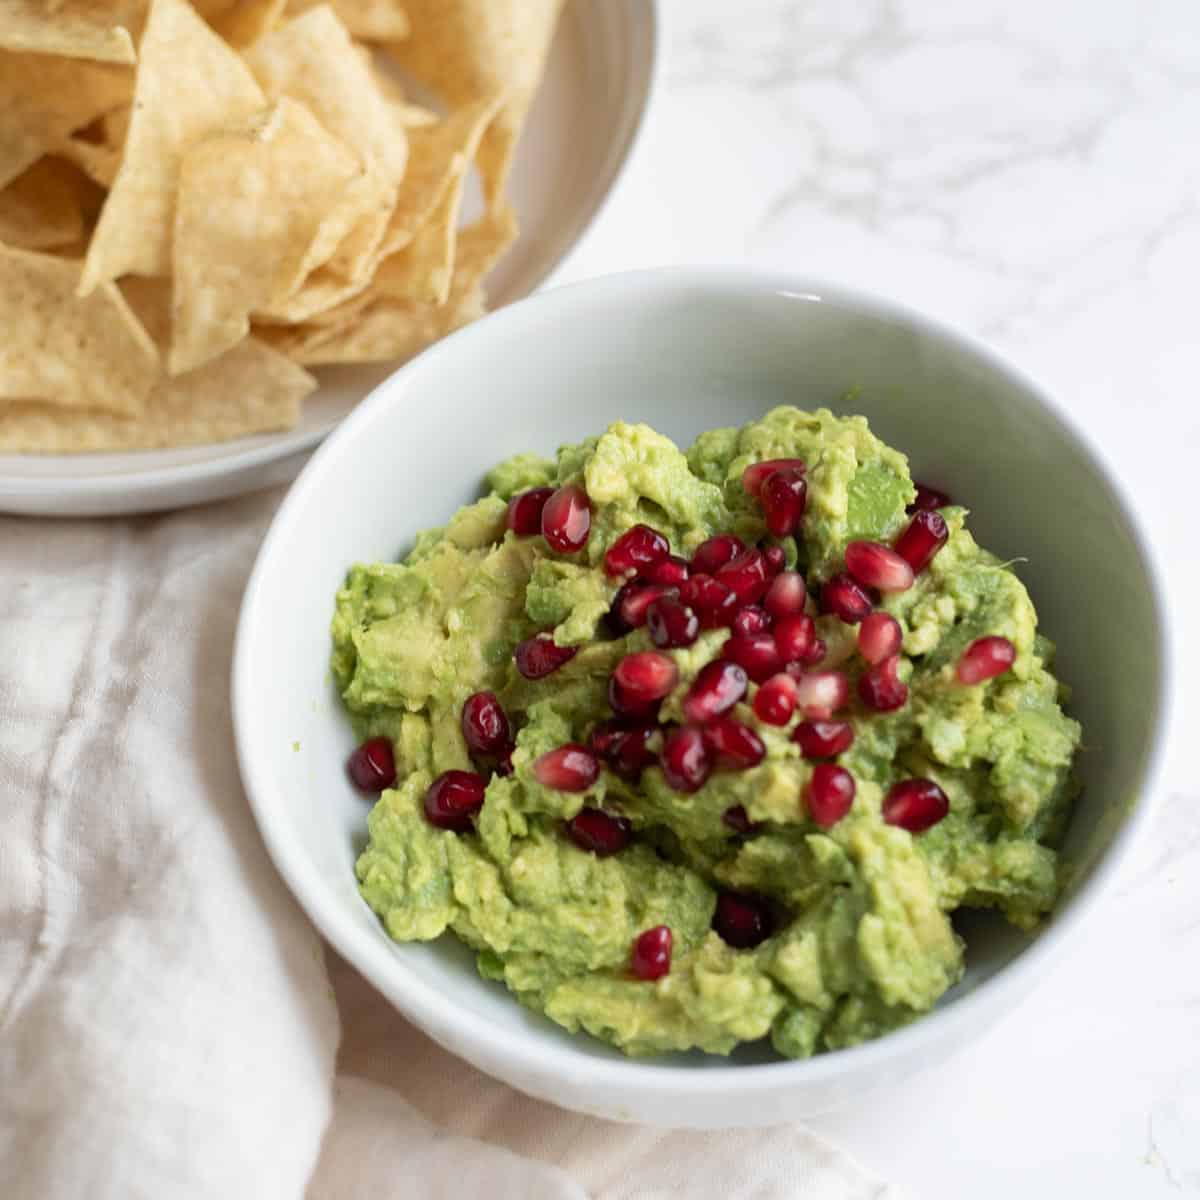 guacamole topped with pomegranate seeds in a white bowl next to a white towel and tortilla chips